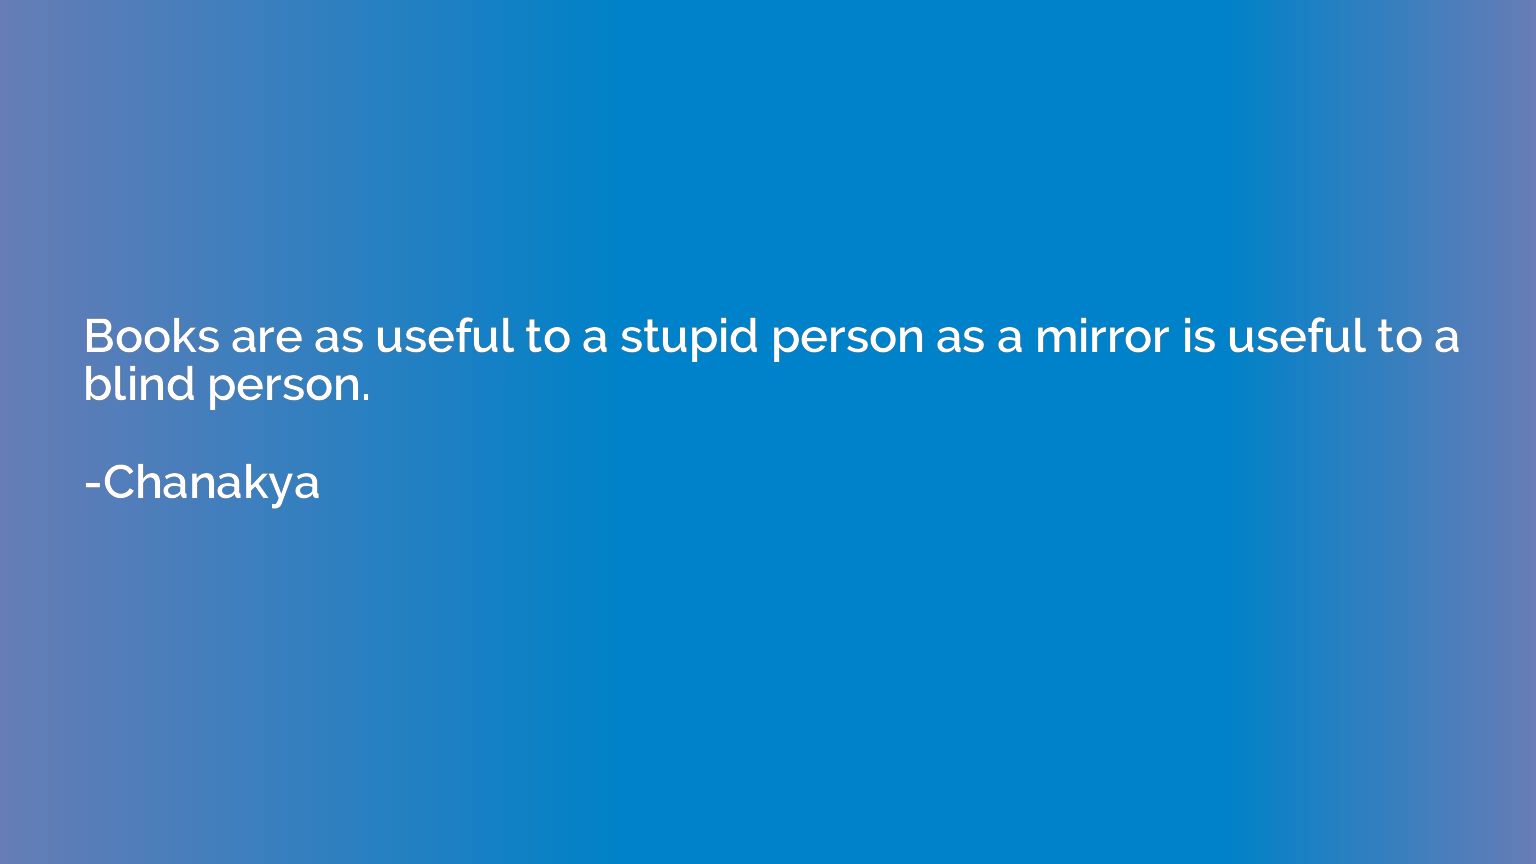 Books are as useful to a stupid person as a mirror is useful